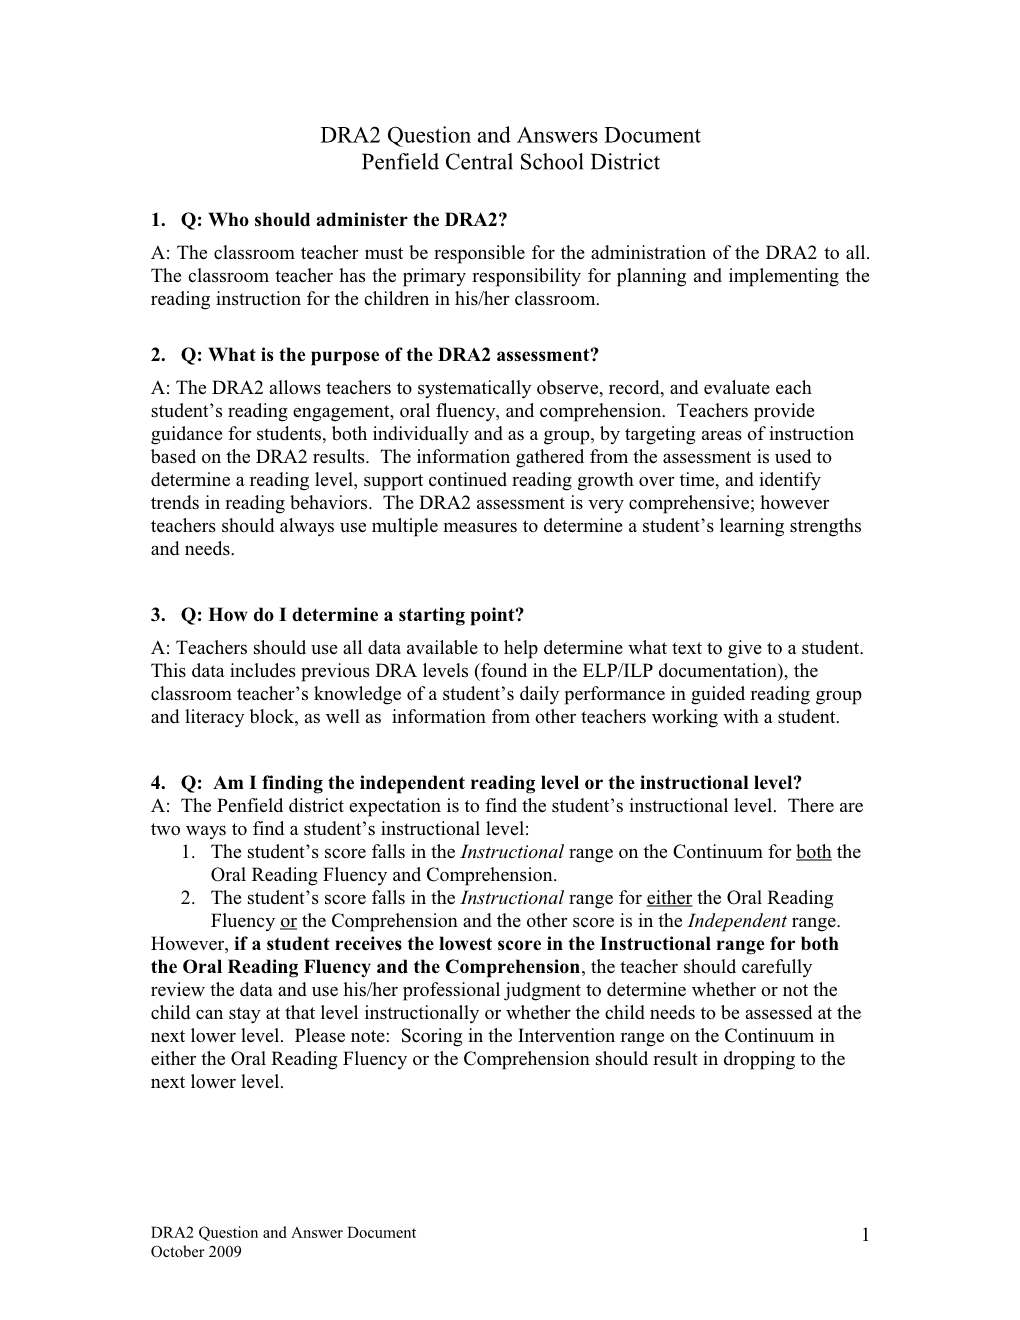 DRA2 Question and Answers Document